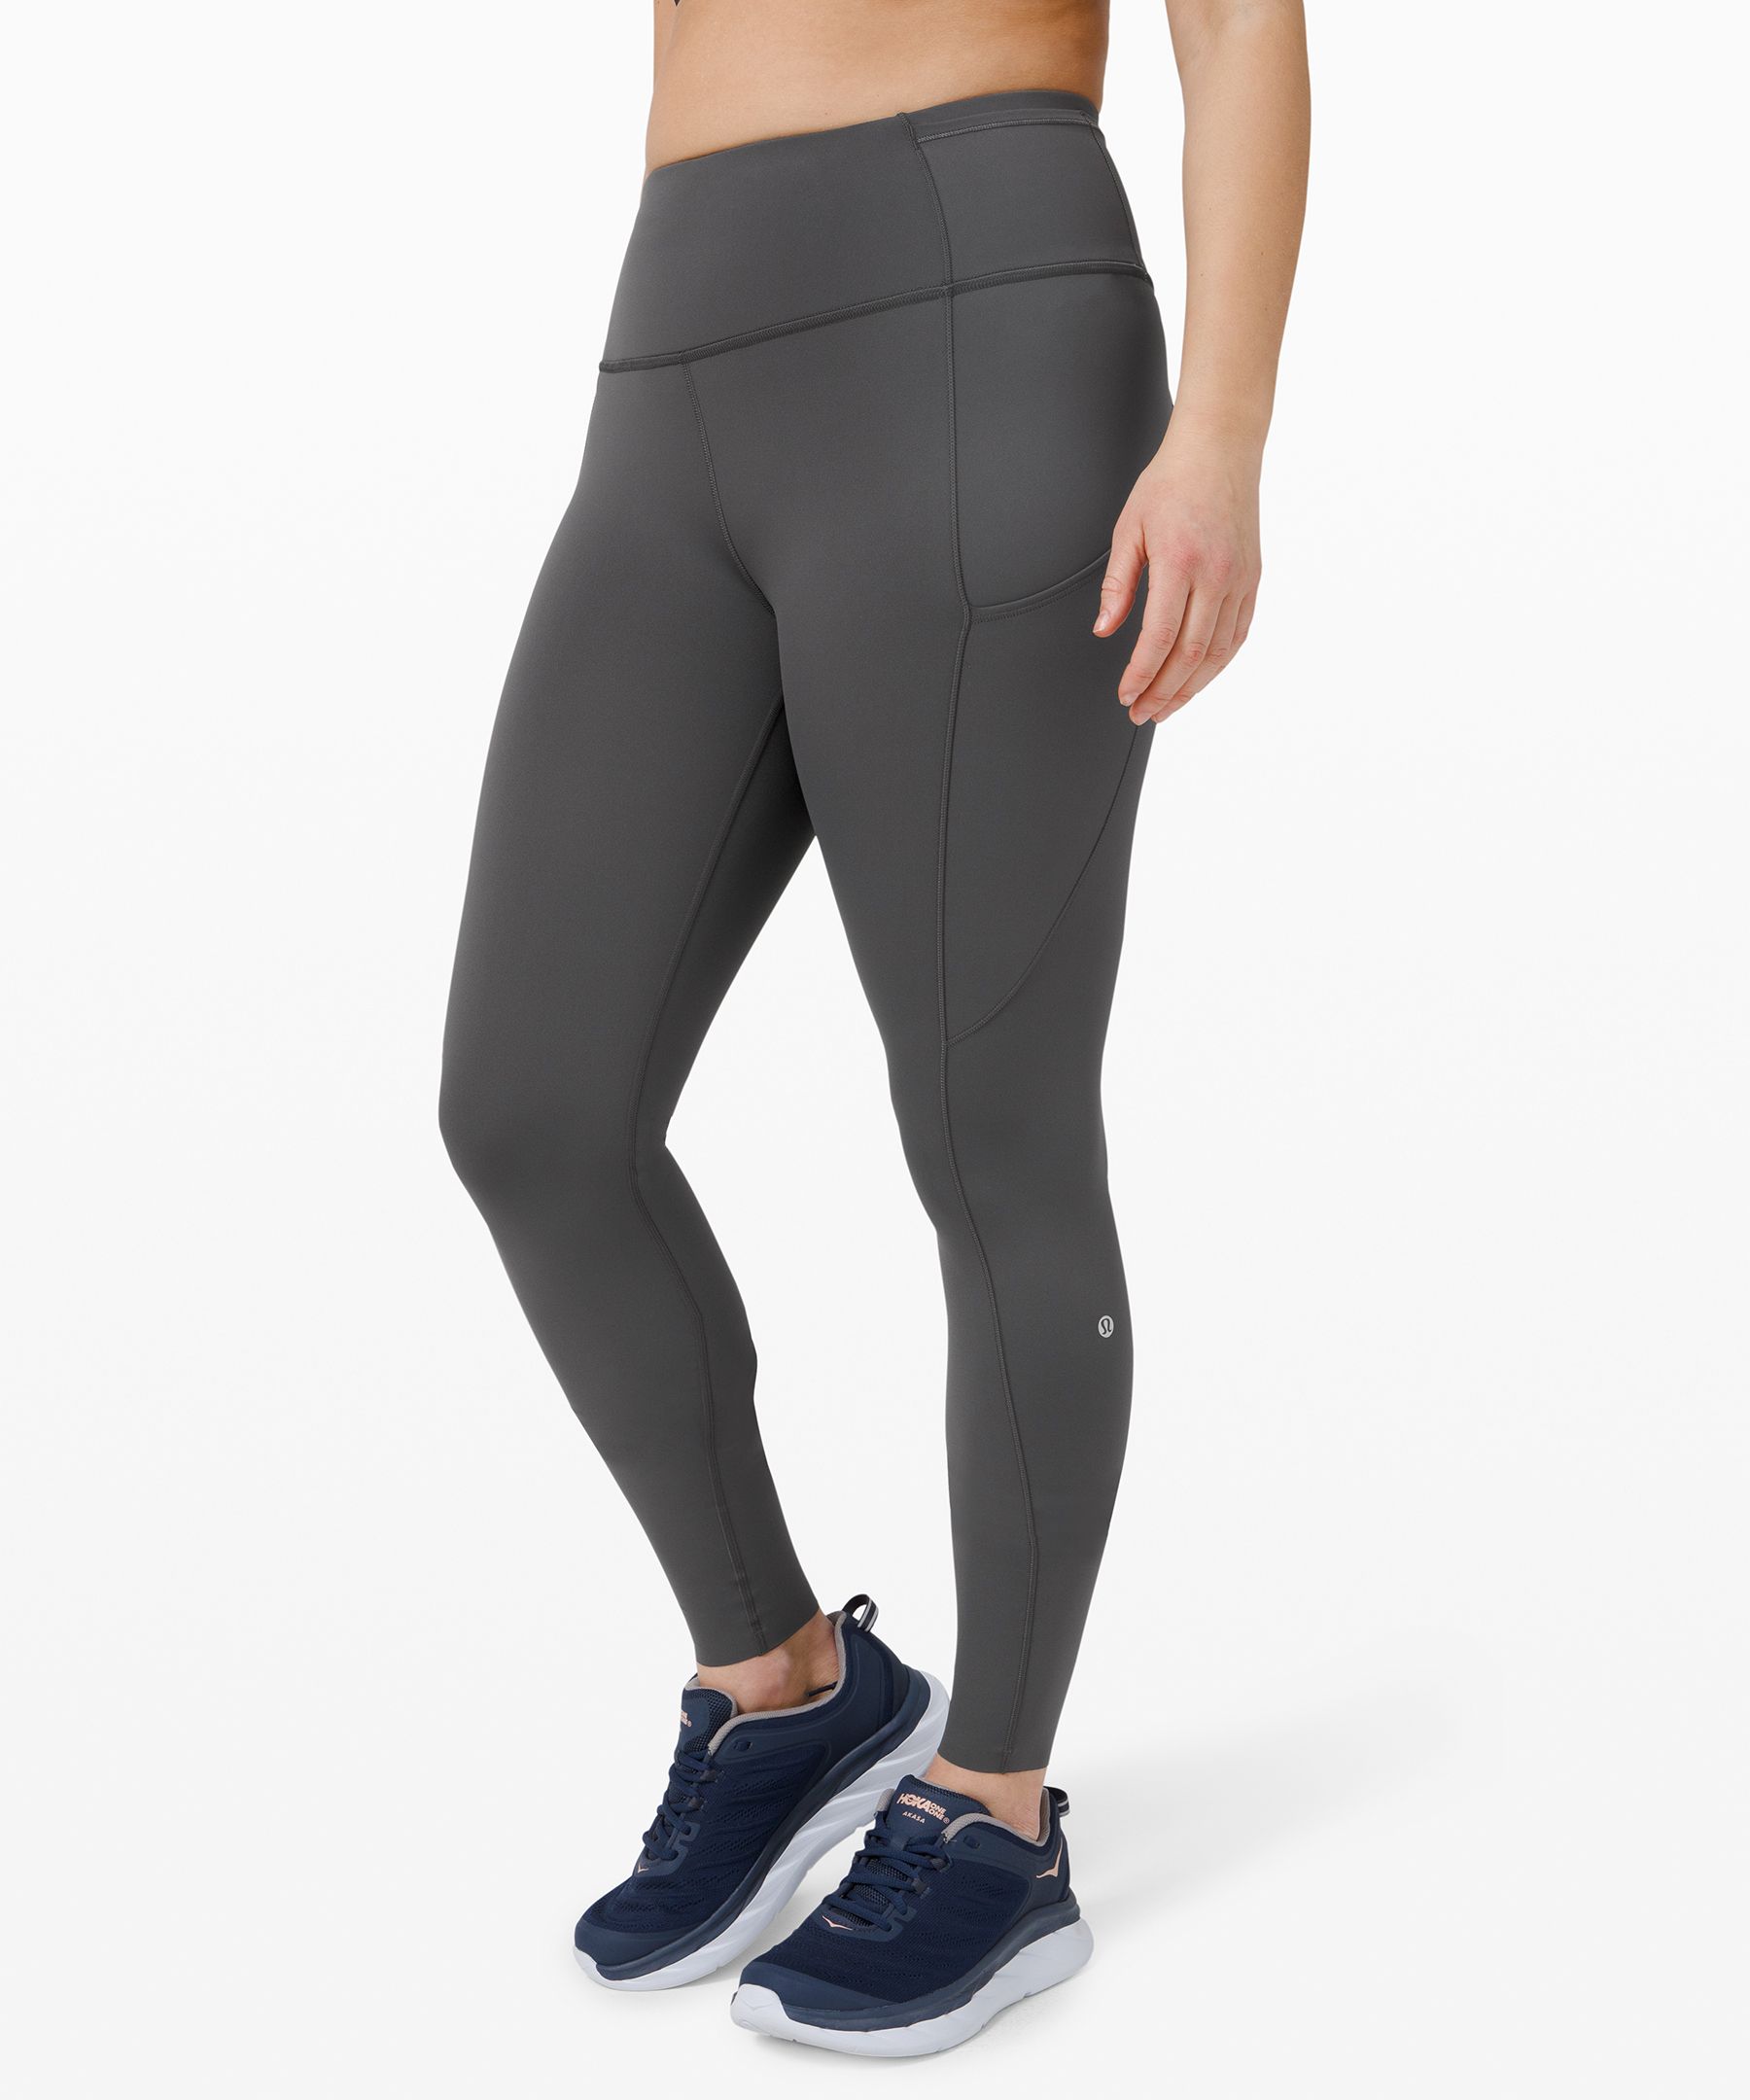 Fast and Free High-Rise Tight 31, Women's Leggings/Tights